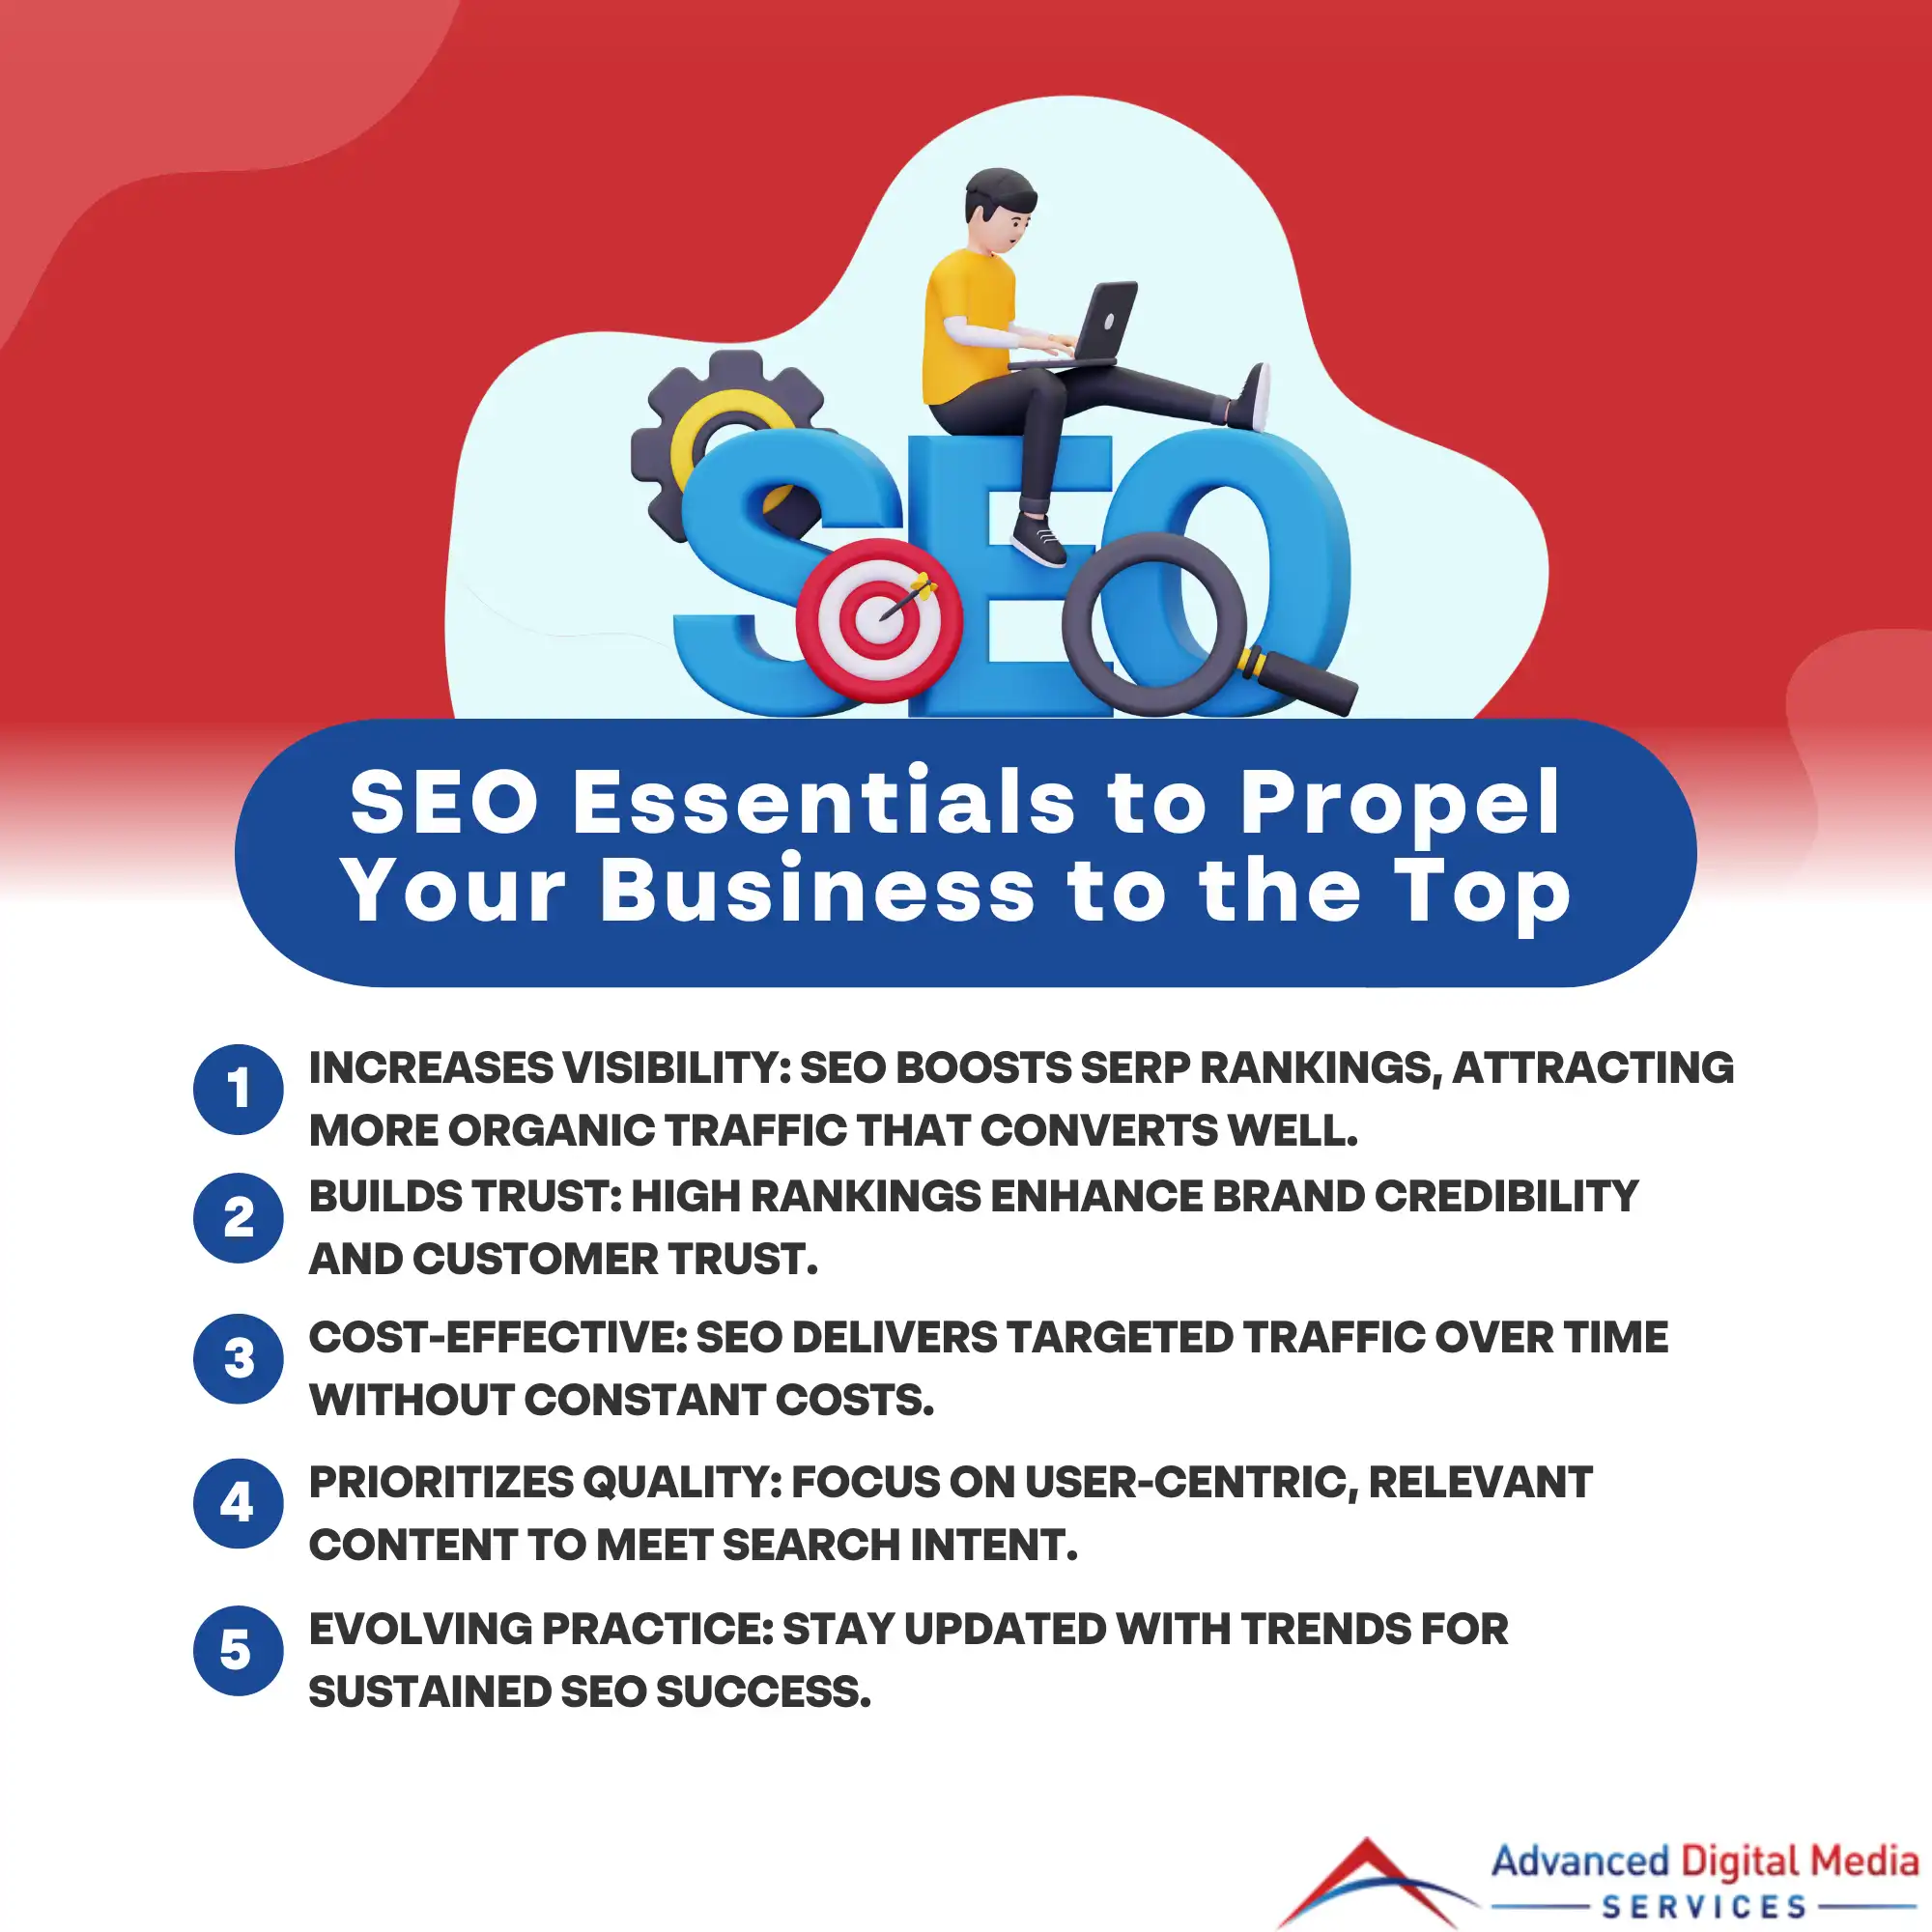 SEO Essentials to Propel Your Business to the Top